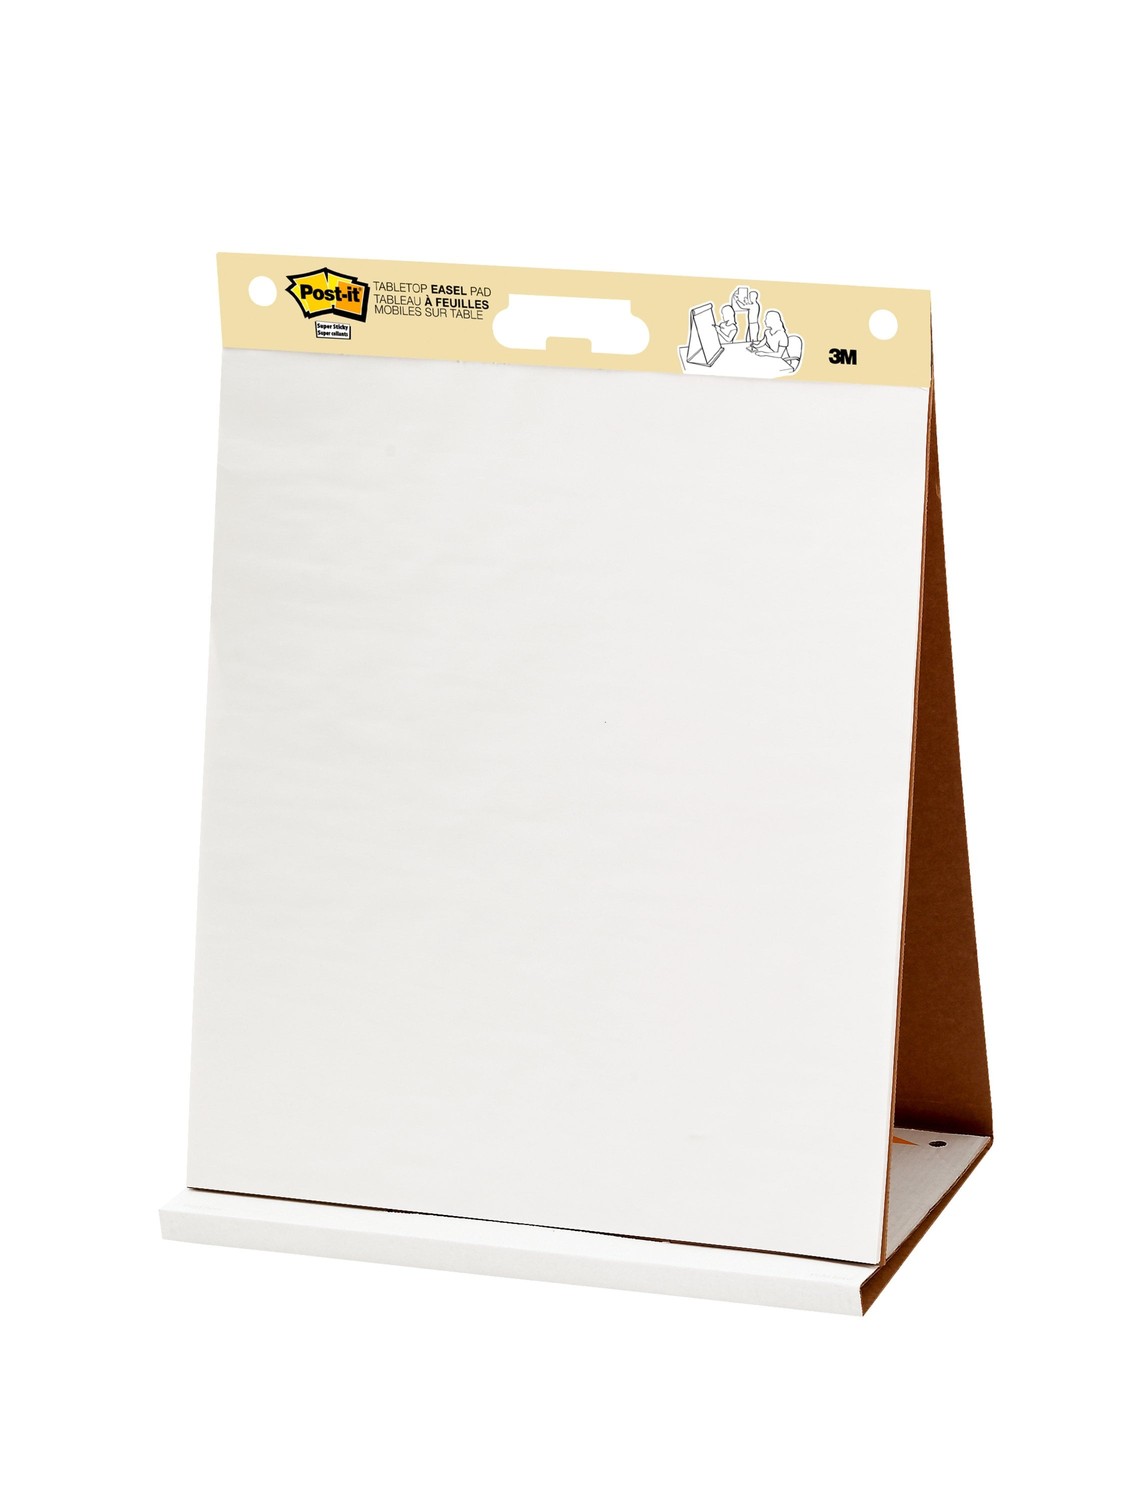 Tabletop Easel Pad, 20 in x 23 in, White, 20 Sheets/Pad